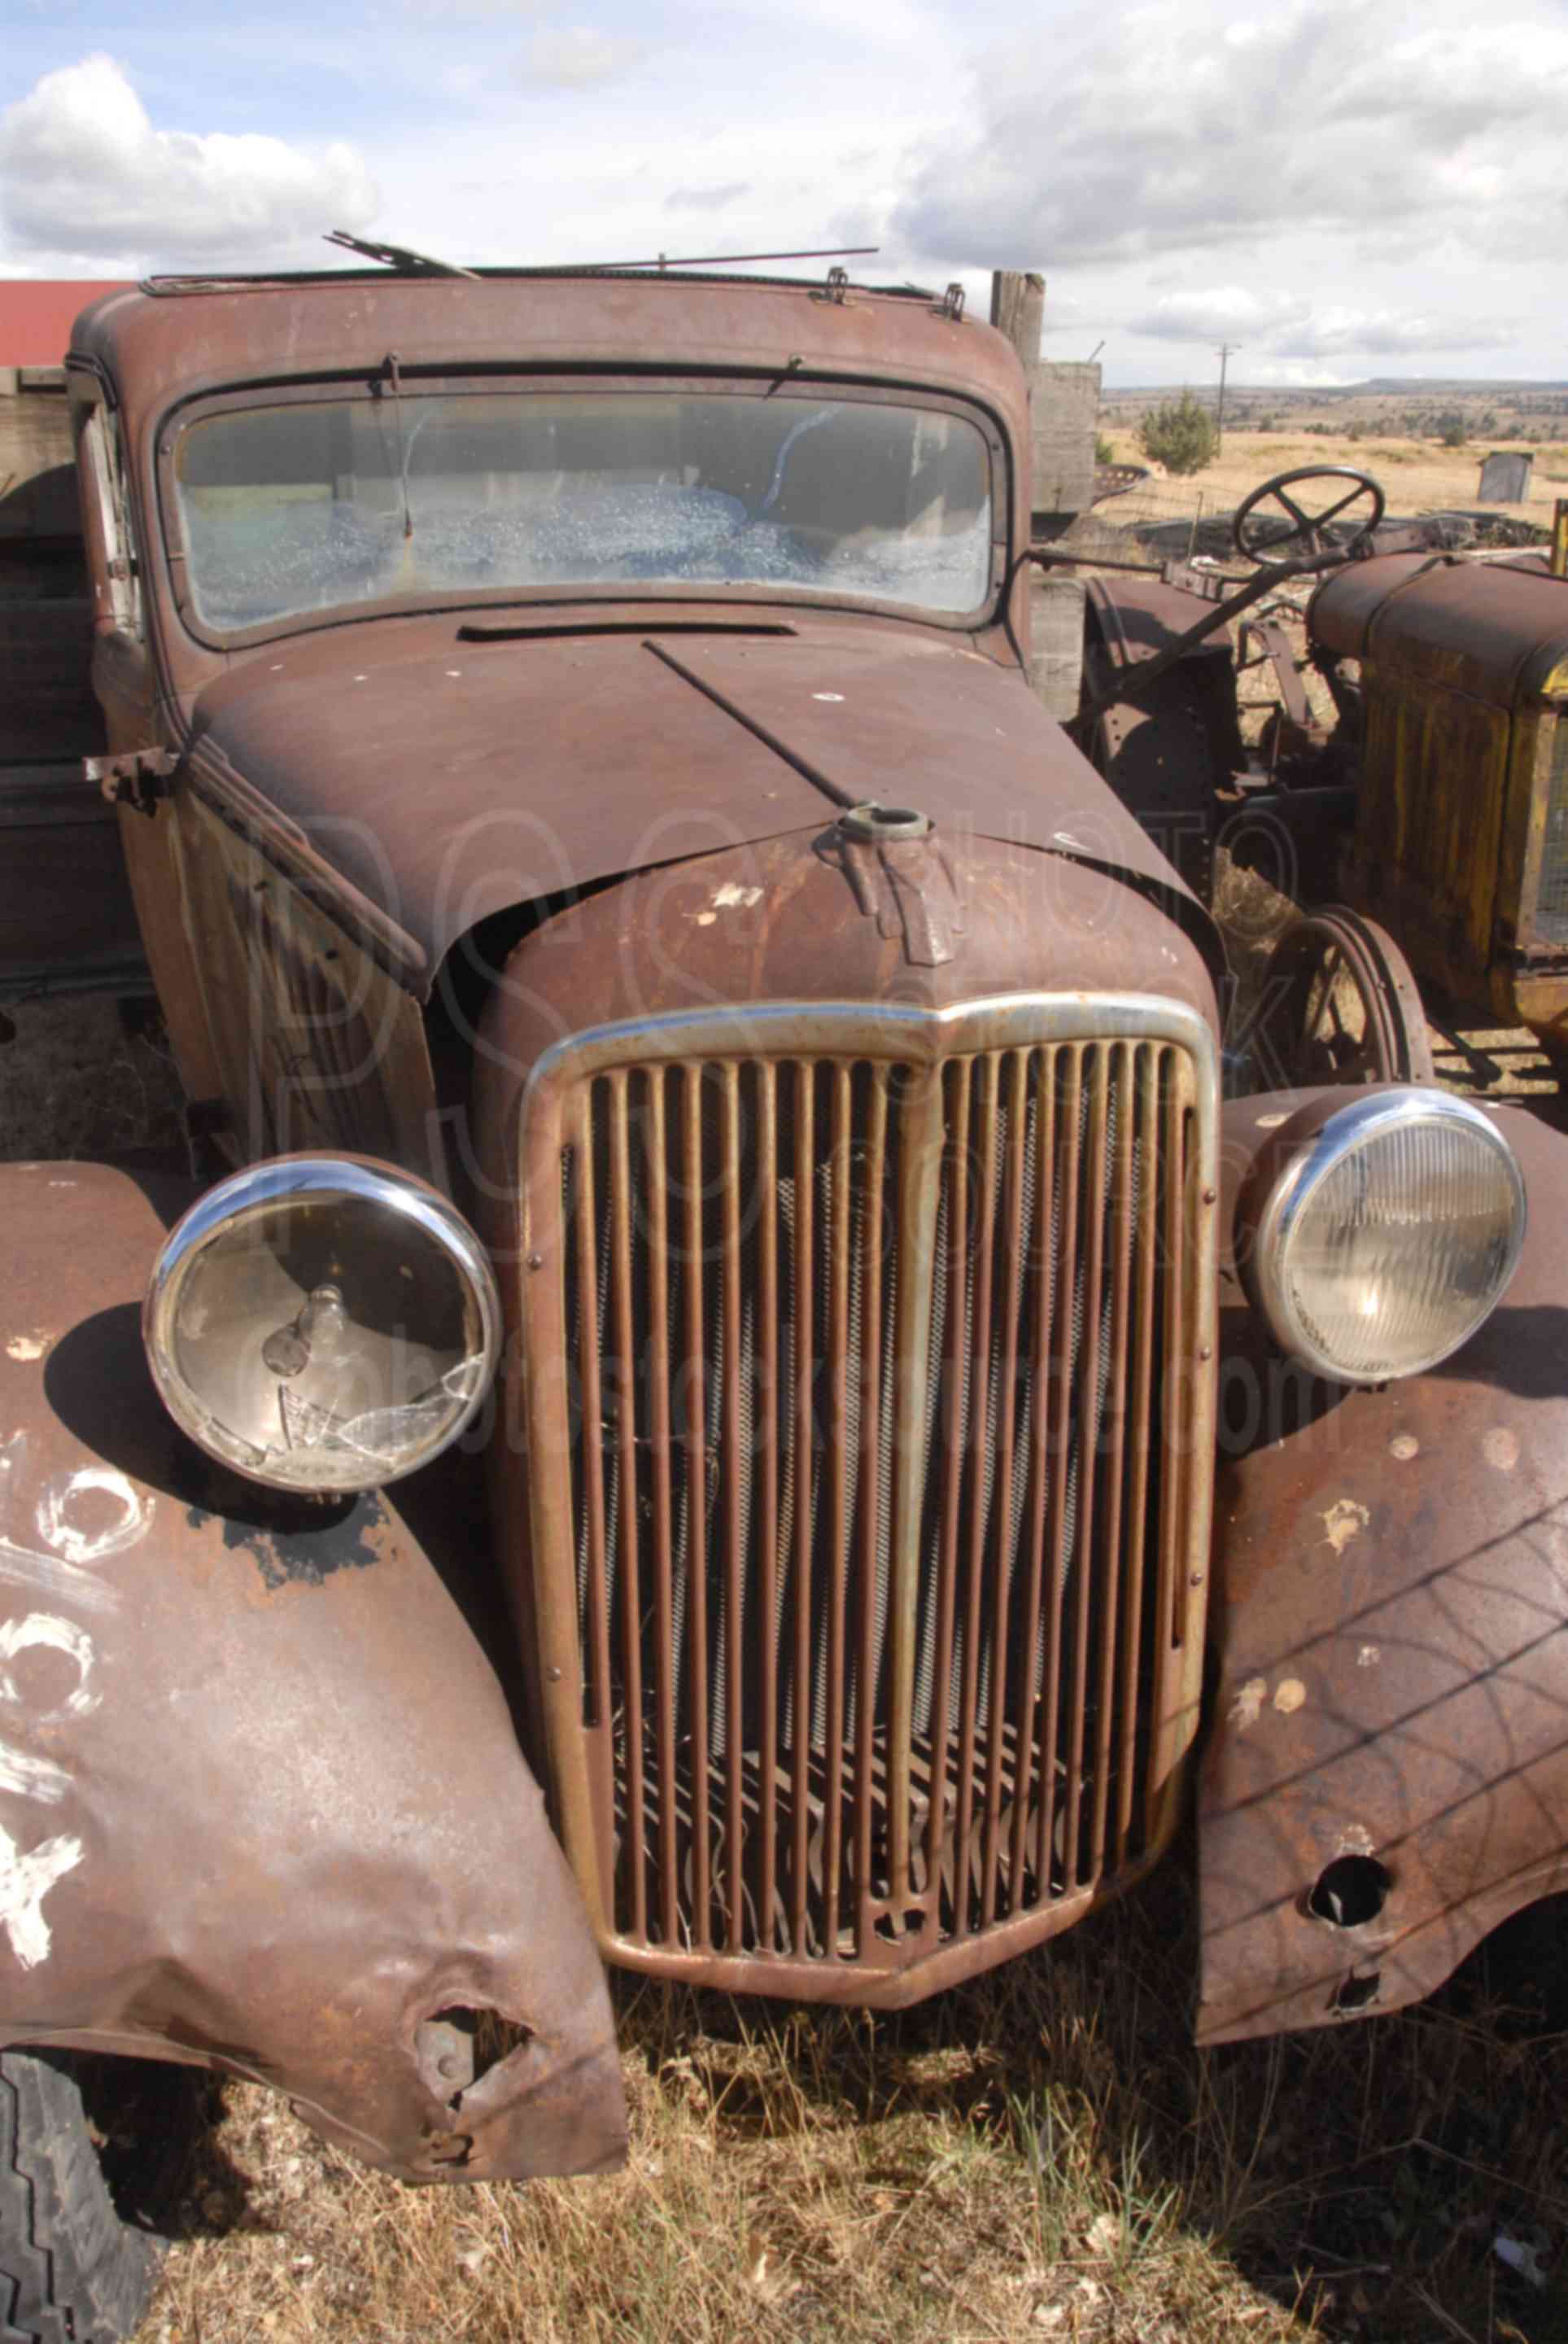 Old Rusty Truck,rust,antique,old,vehicle,trucks